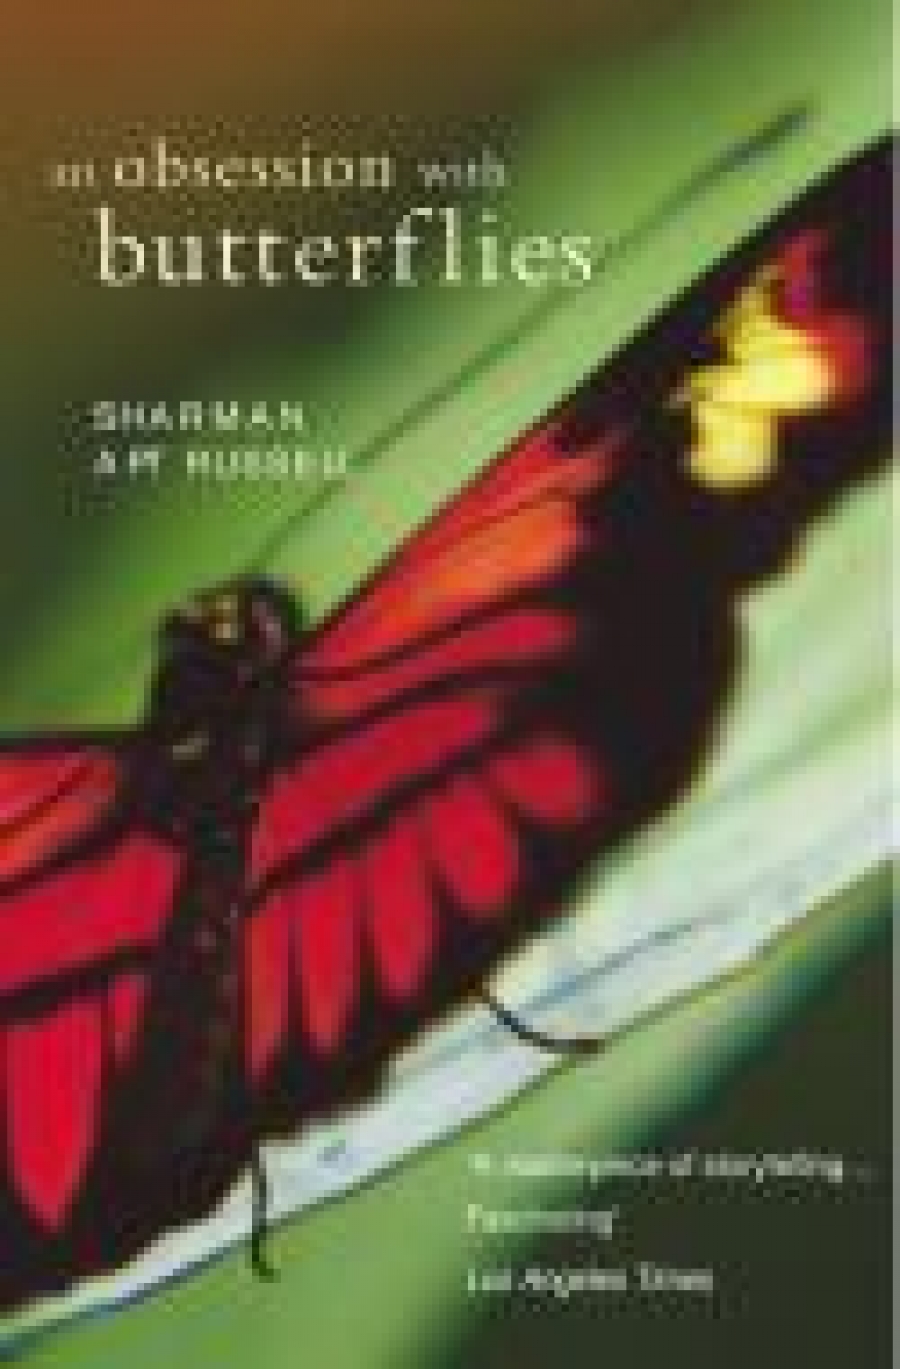 Russell, Sharman Obsession With Butterflies, An 